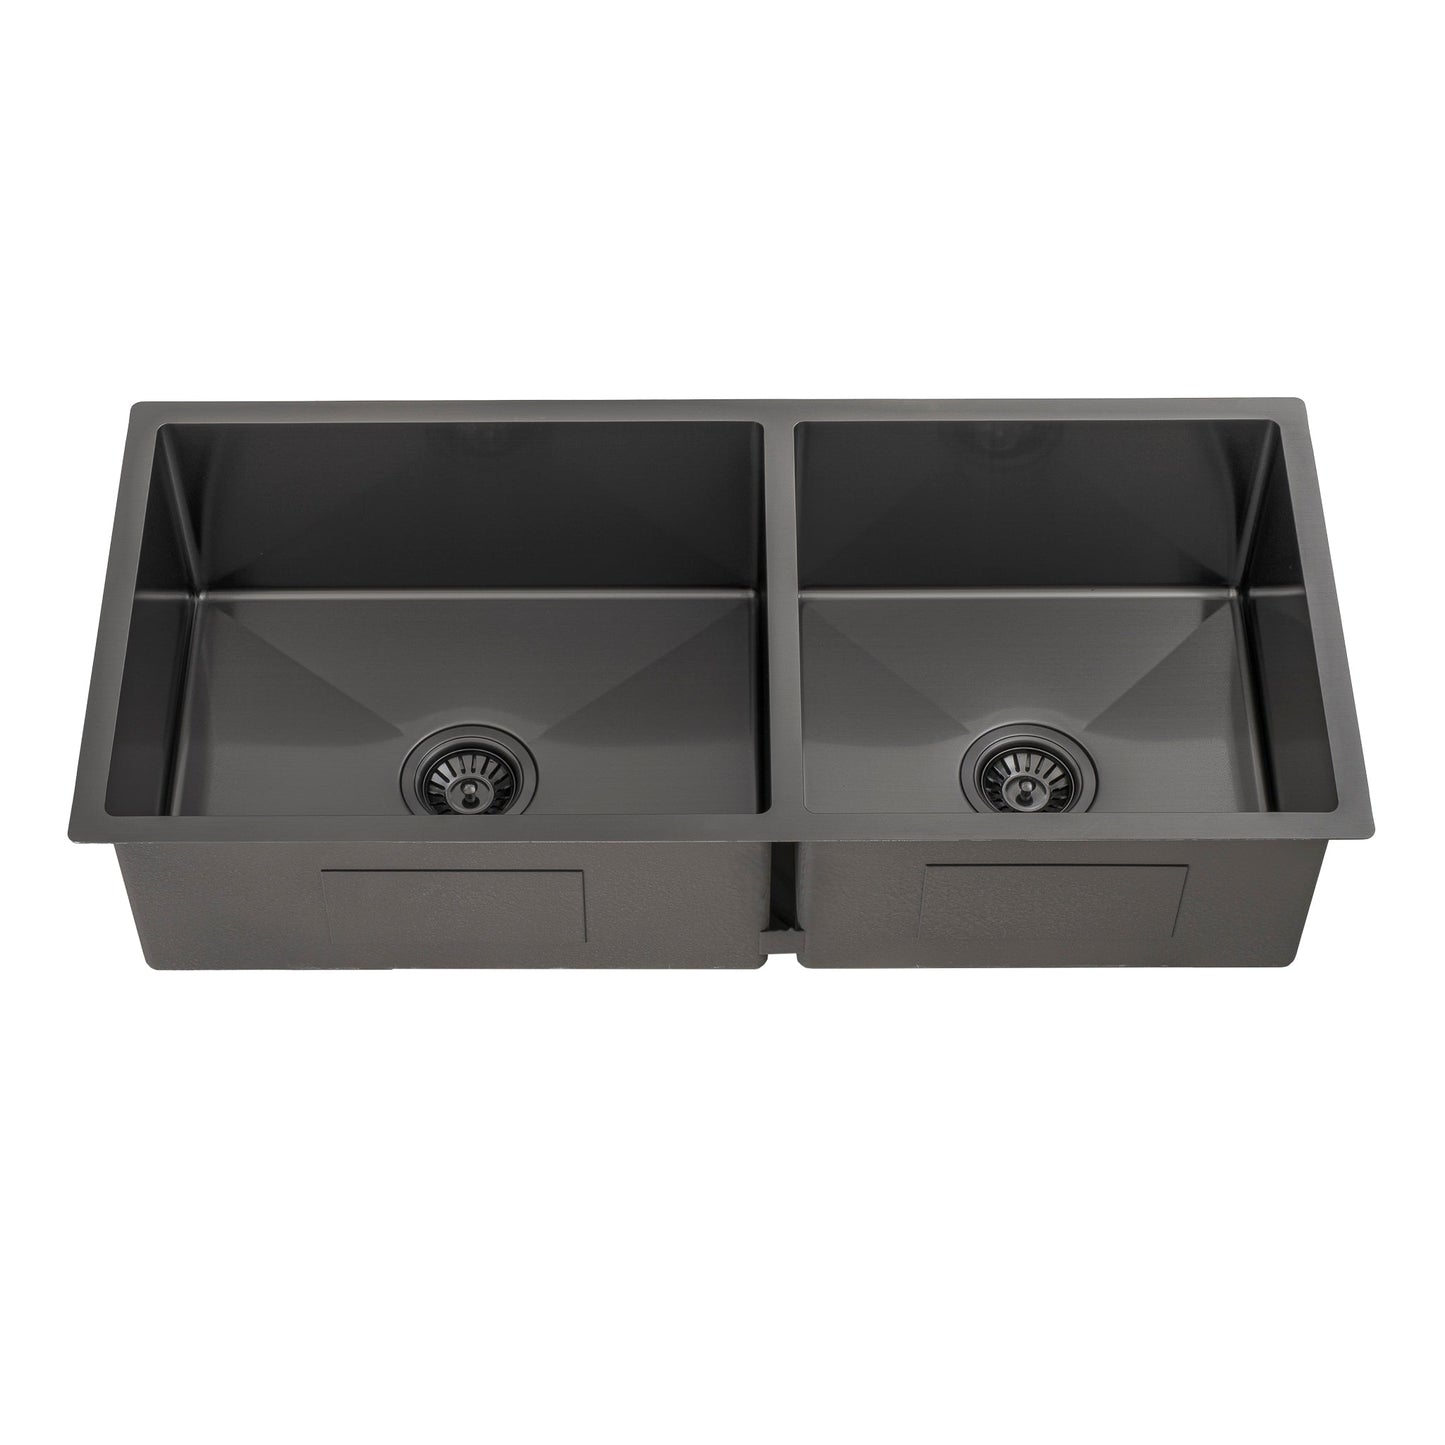 Retto II 975mm x 450mm x 230mm Stainless Steel Double Sink, Brushed Gunmetal Black